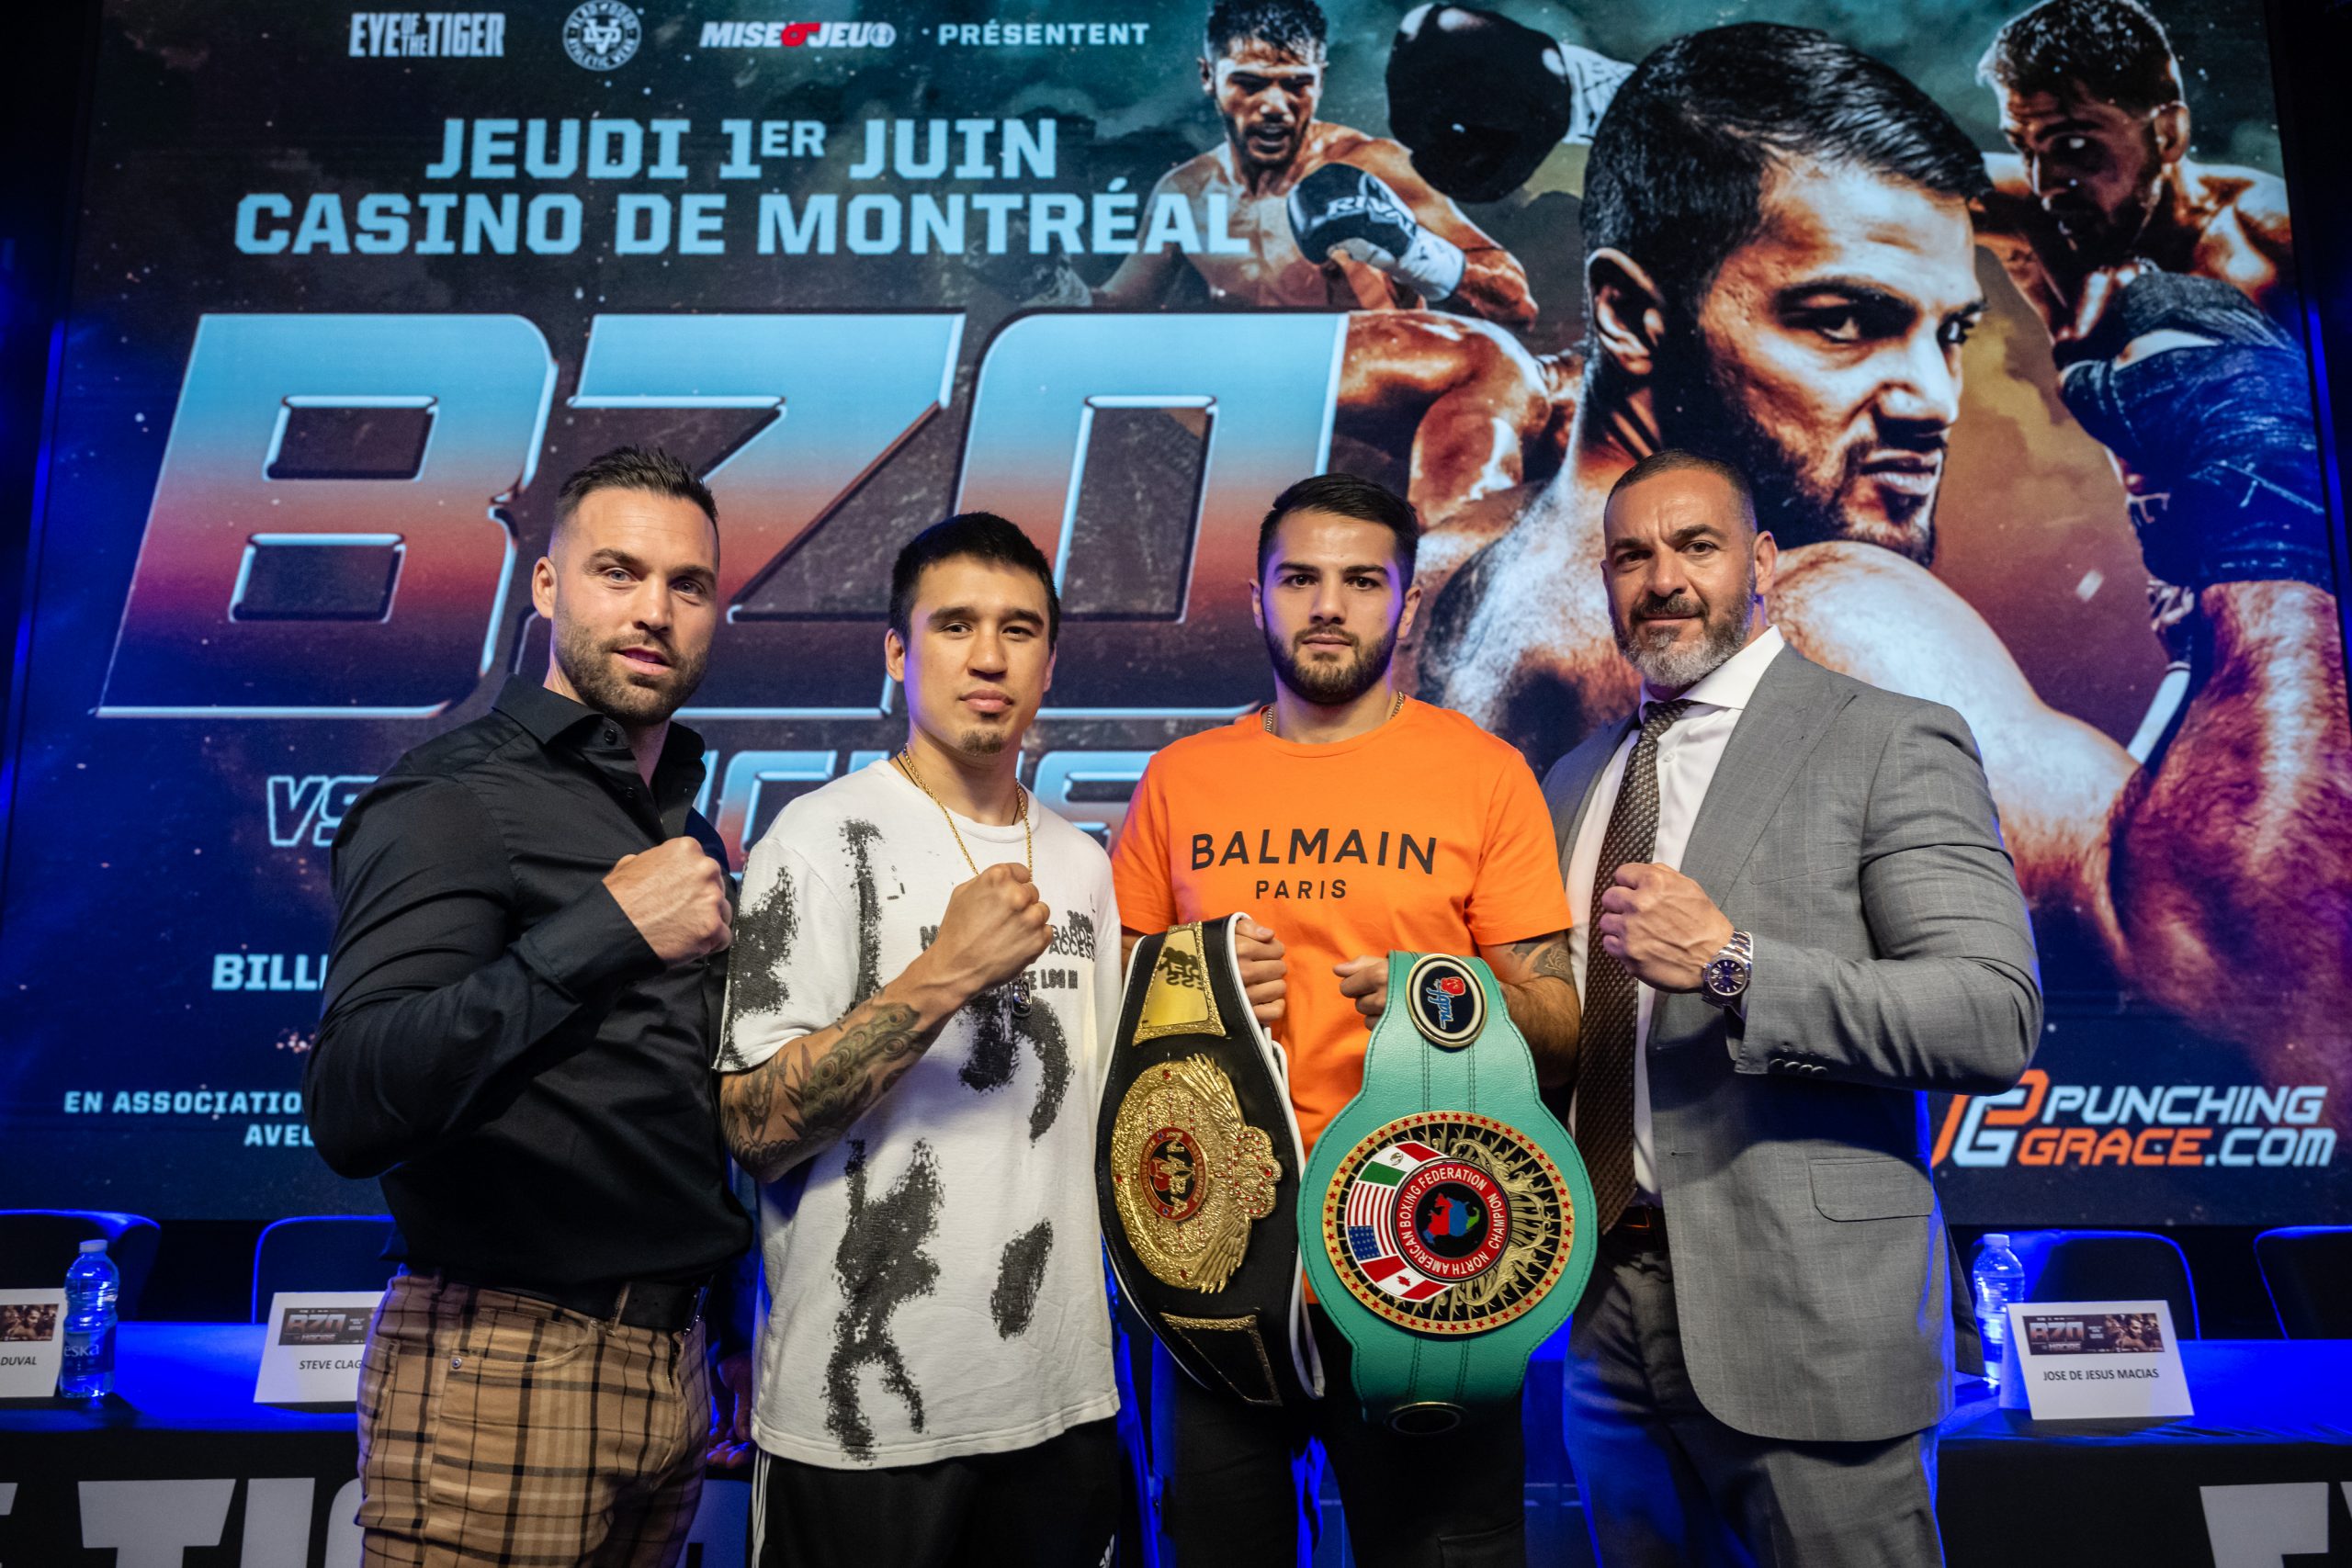 Erik Bazinyan feels he is in a ‘must-win fight’ against Jose Macias on Thursday in Canada